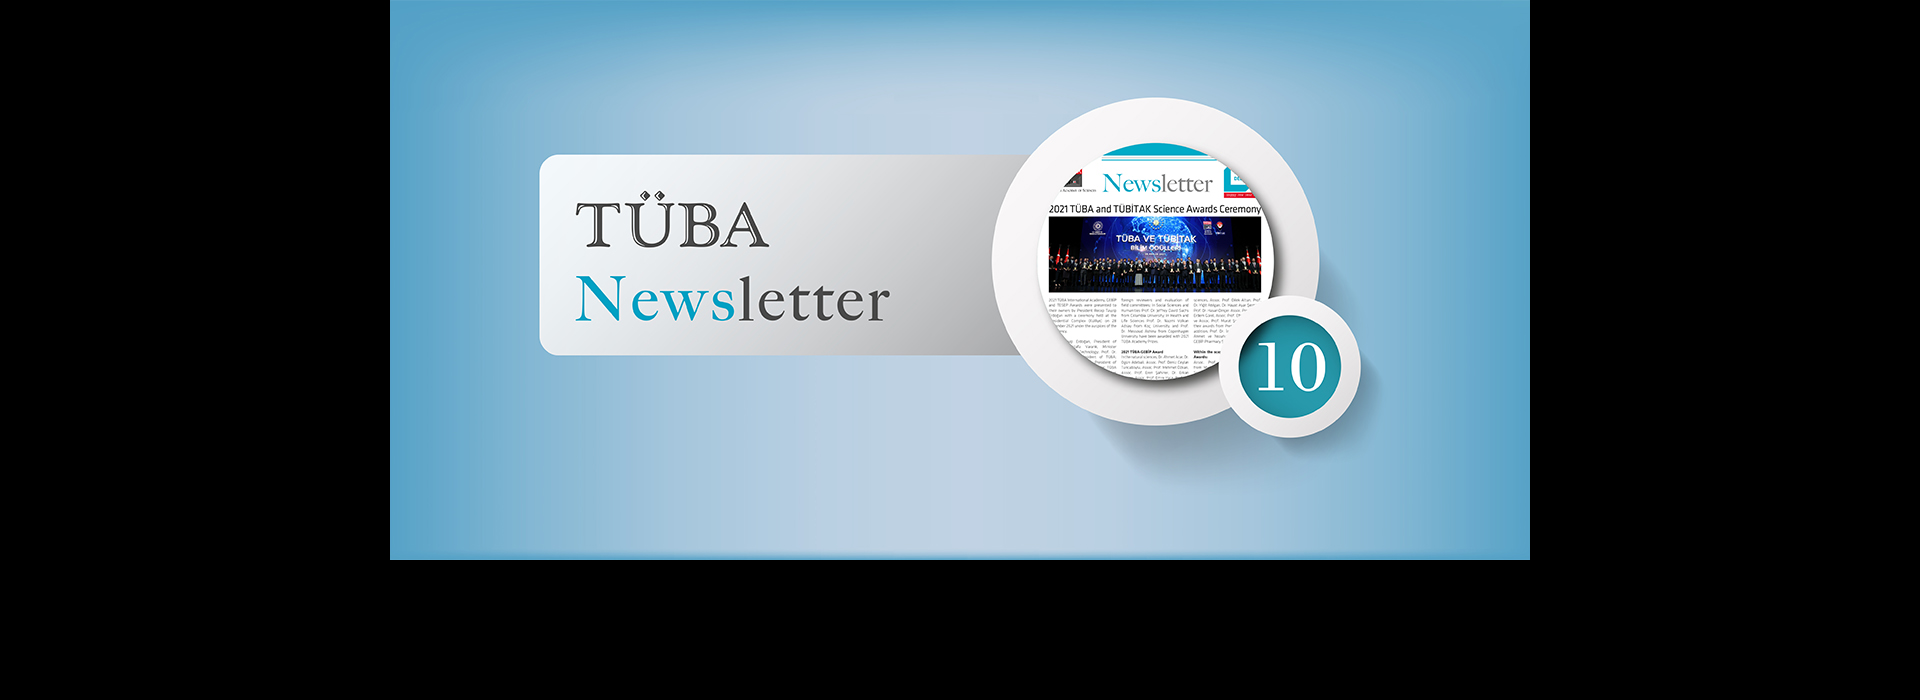 December 2021 Issue of TÜBA-Newsletter was Published